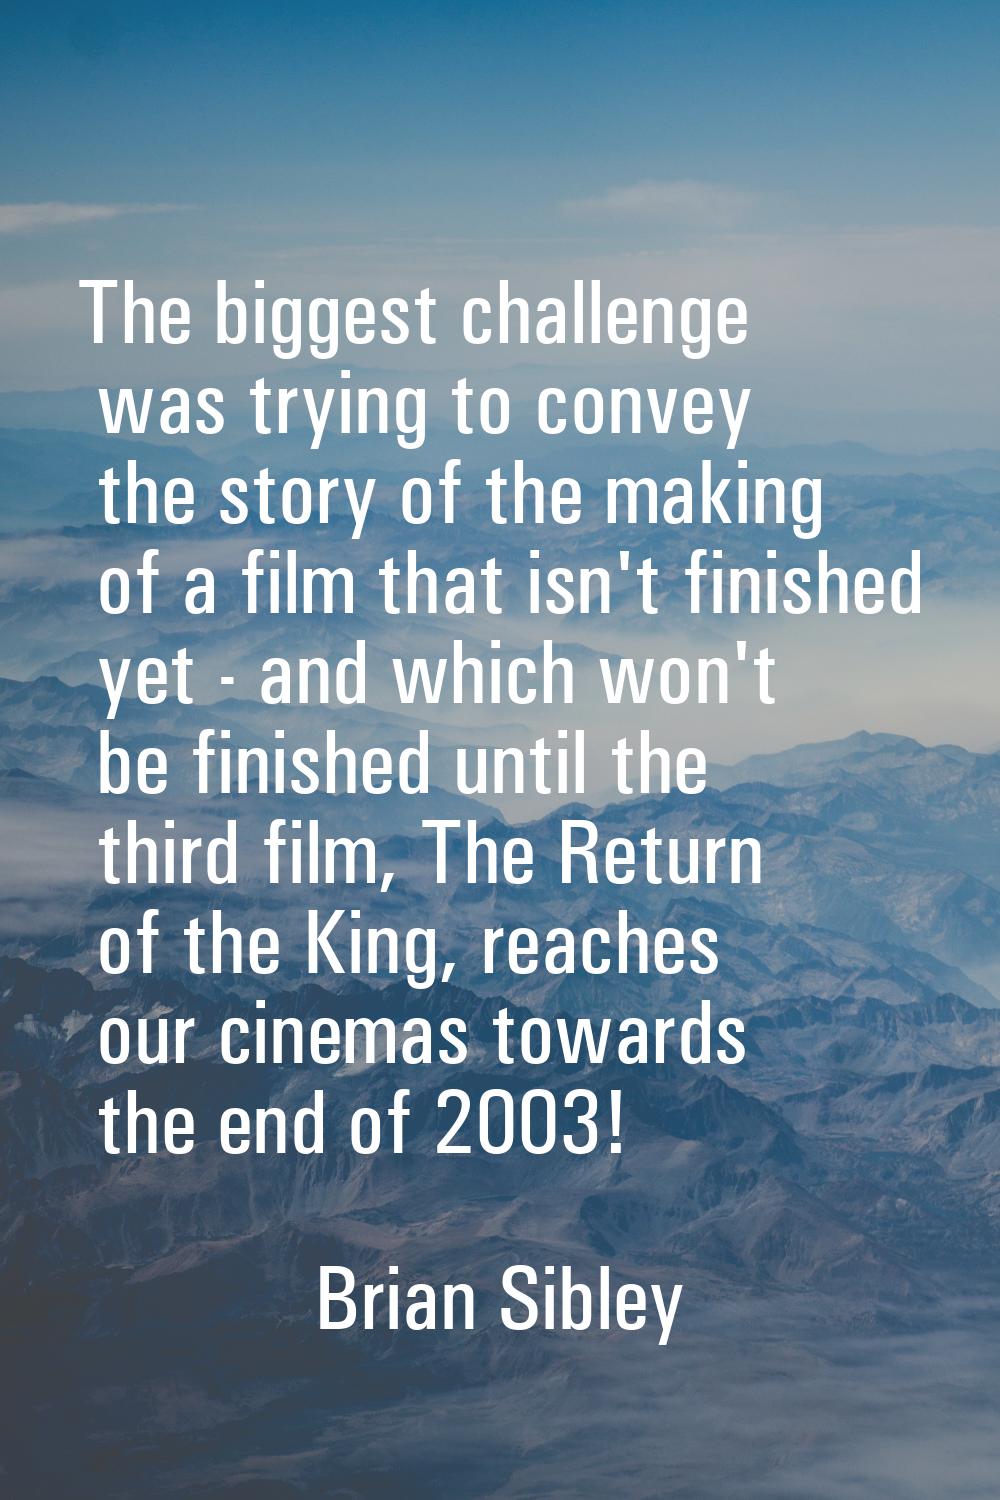 The biggest challenge was trying to convey the story of the making of a film that isn't finished ye